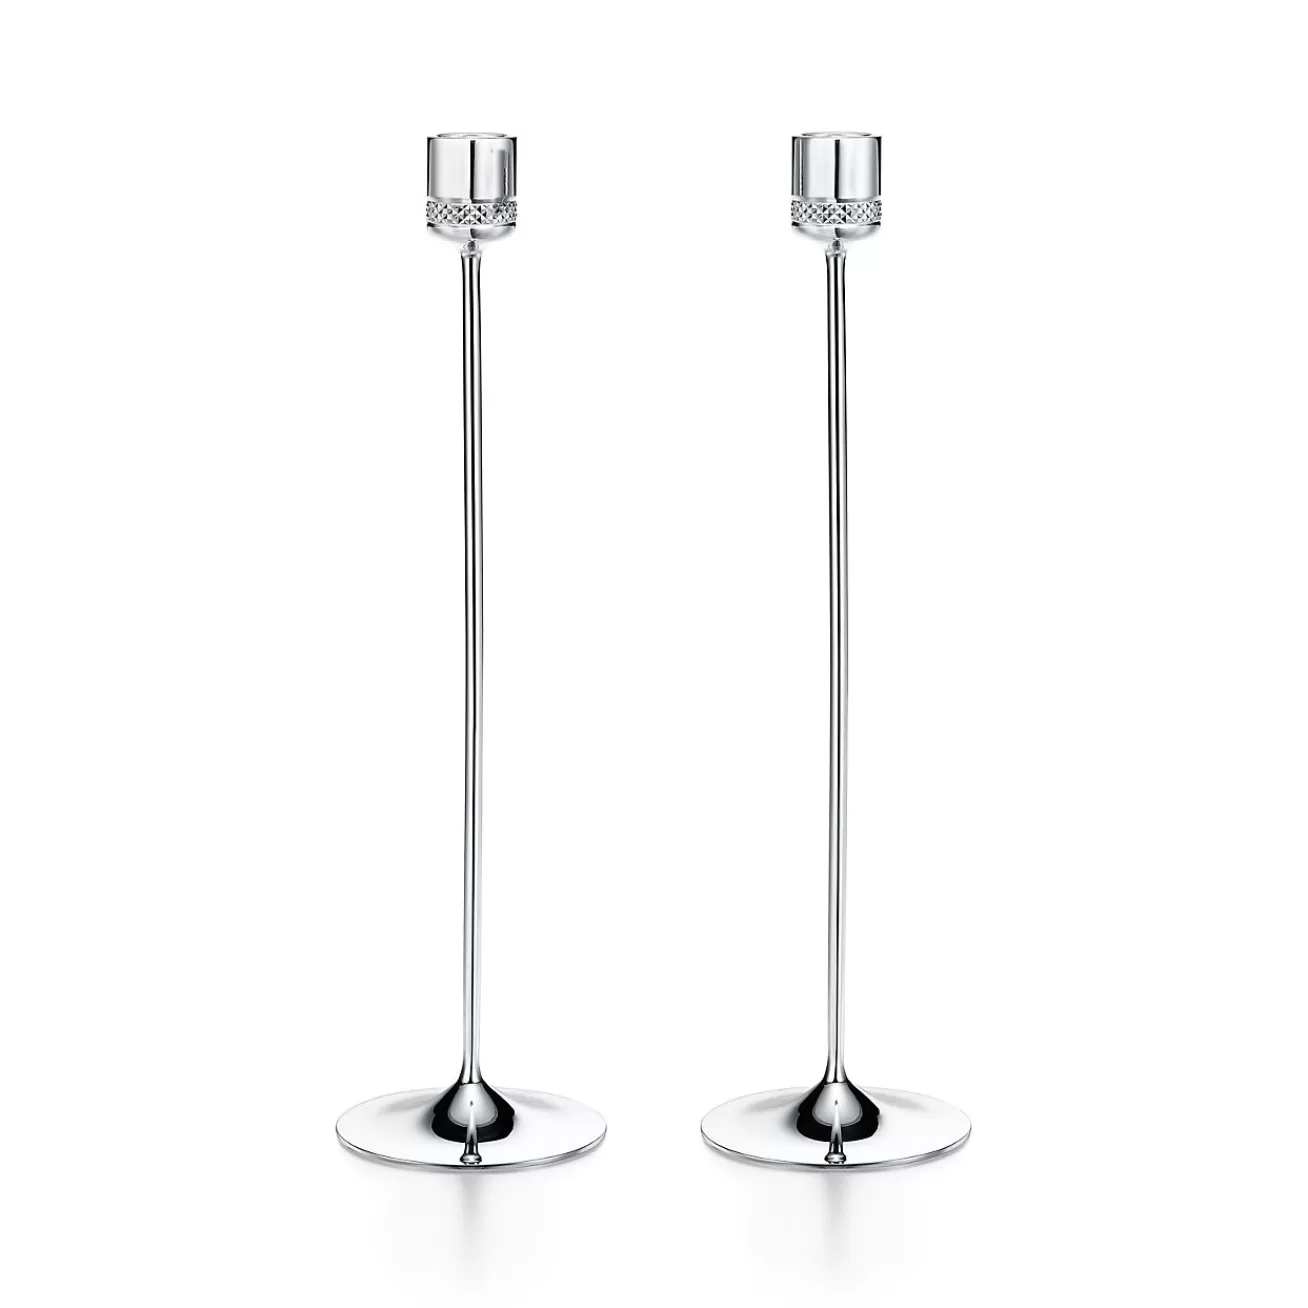 Tiffany & Co. Diamond Point candlesticks in sterling silver. | ^ The Home | Housewarming Gifts